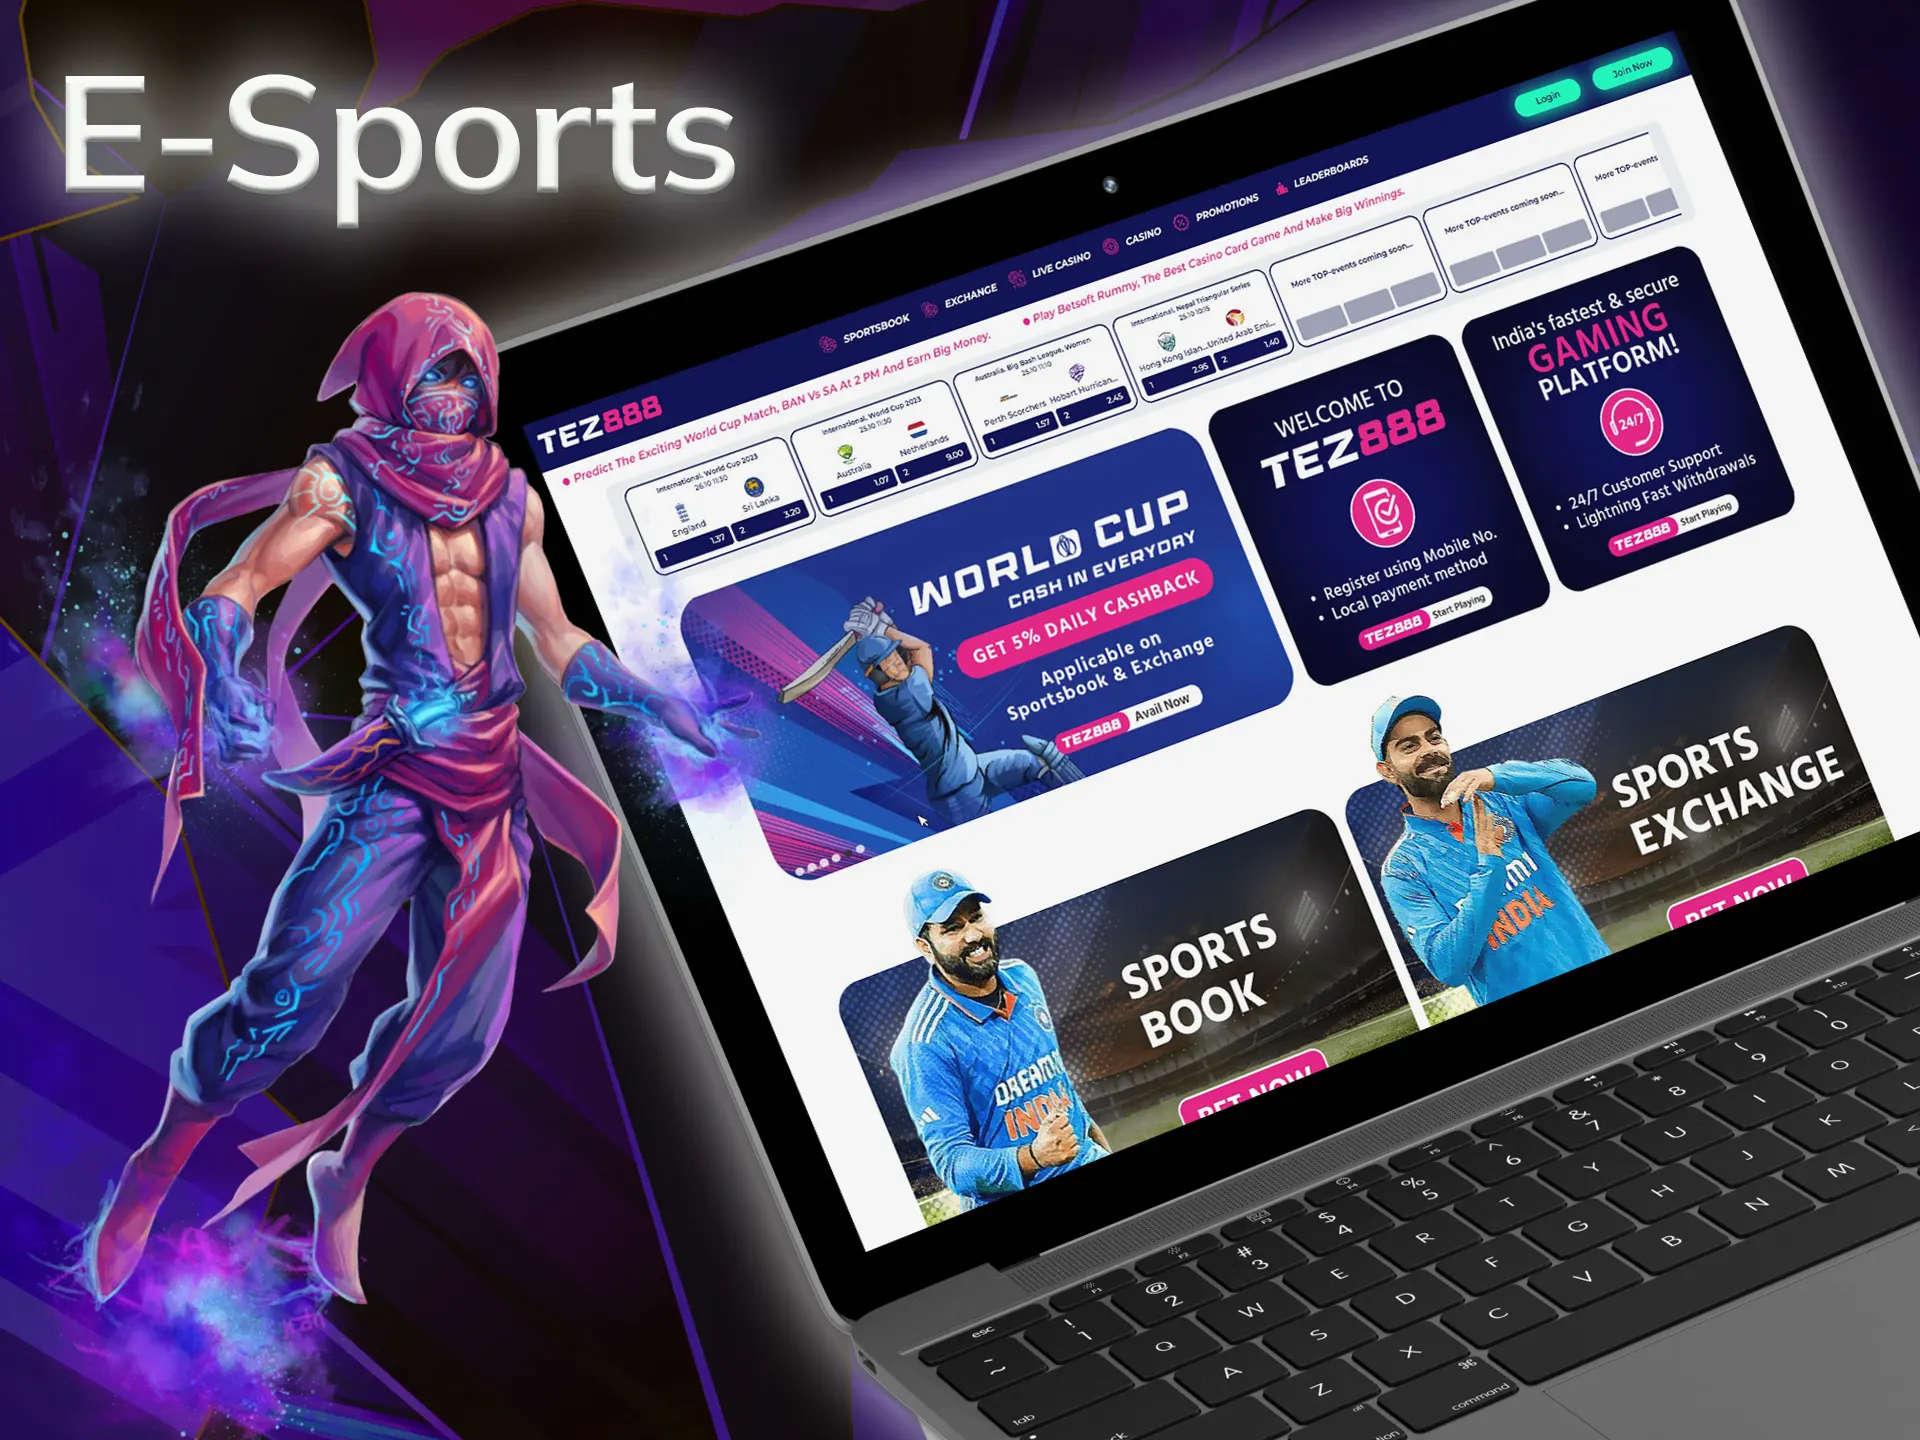 Place your bets on cyber sports with tez888.